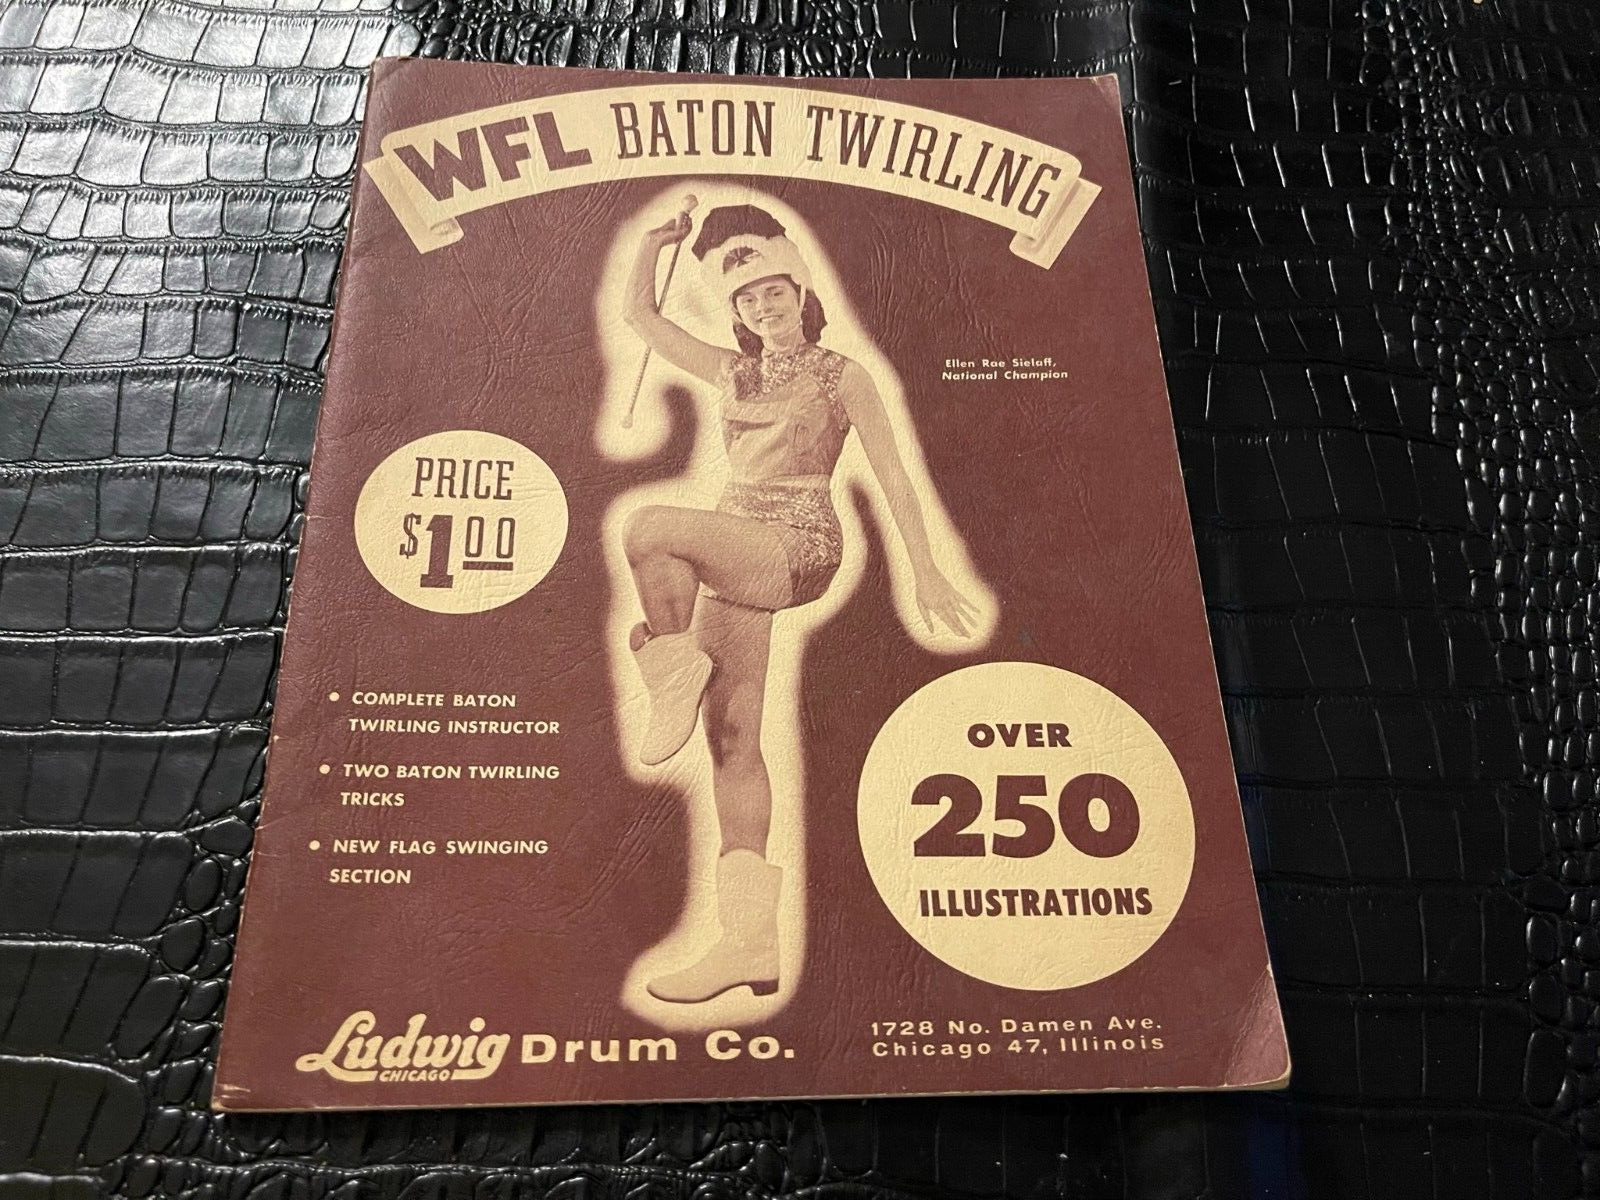 1956 WFL BATON TWIRLING BY LUDWIG DRUM CO - OVER 250 ILLUSTRATIONS misc1359